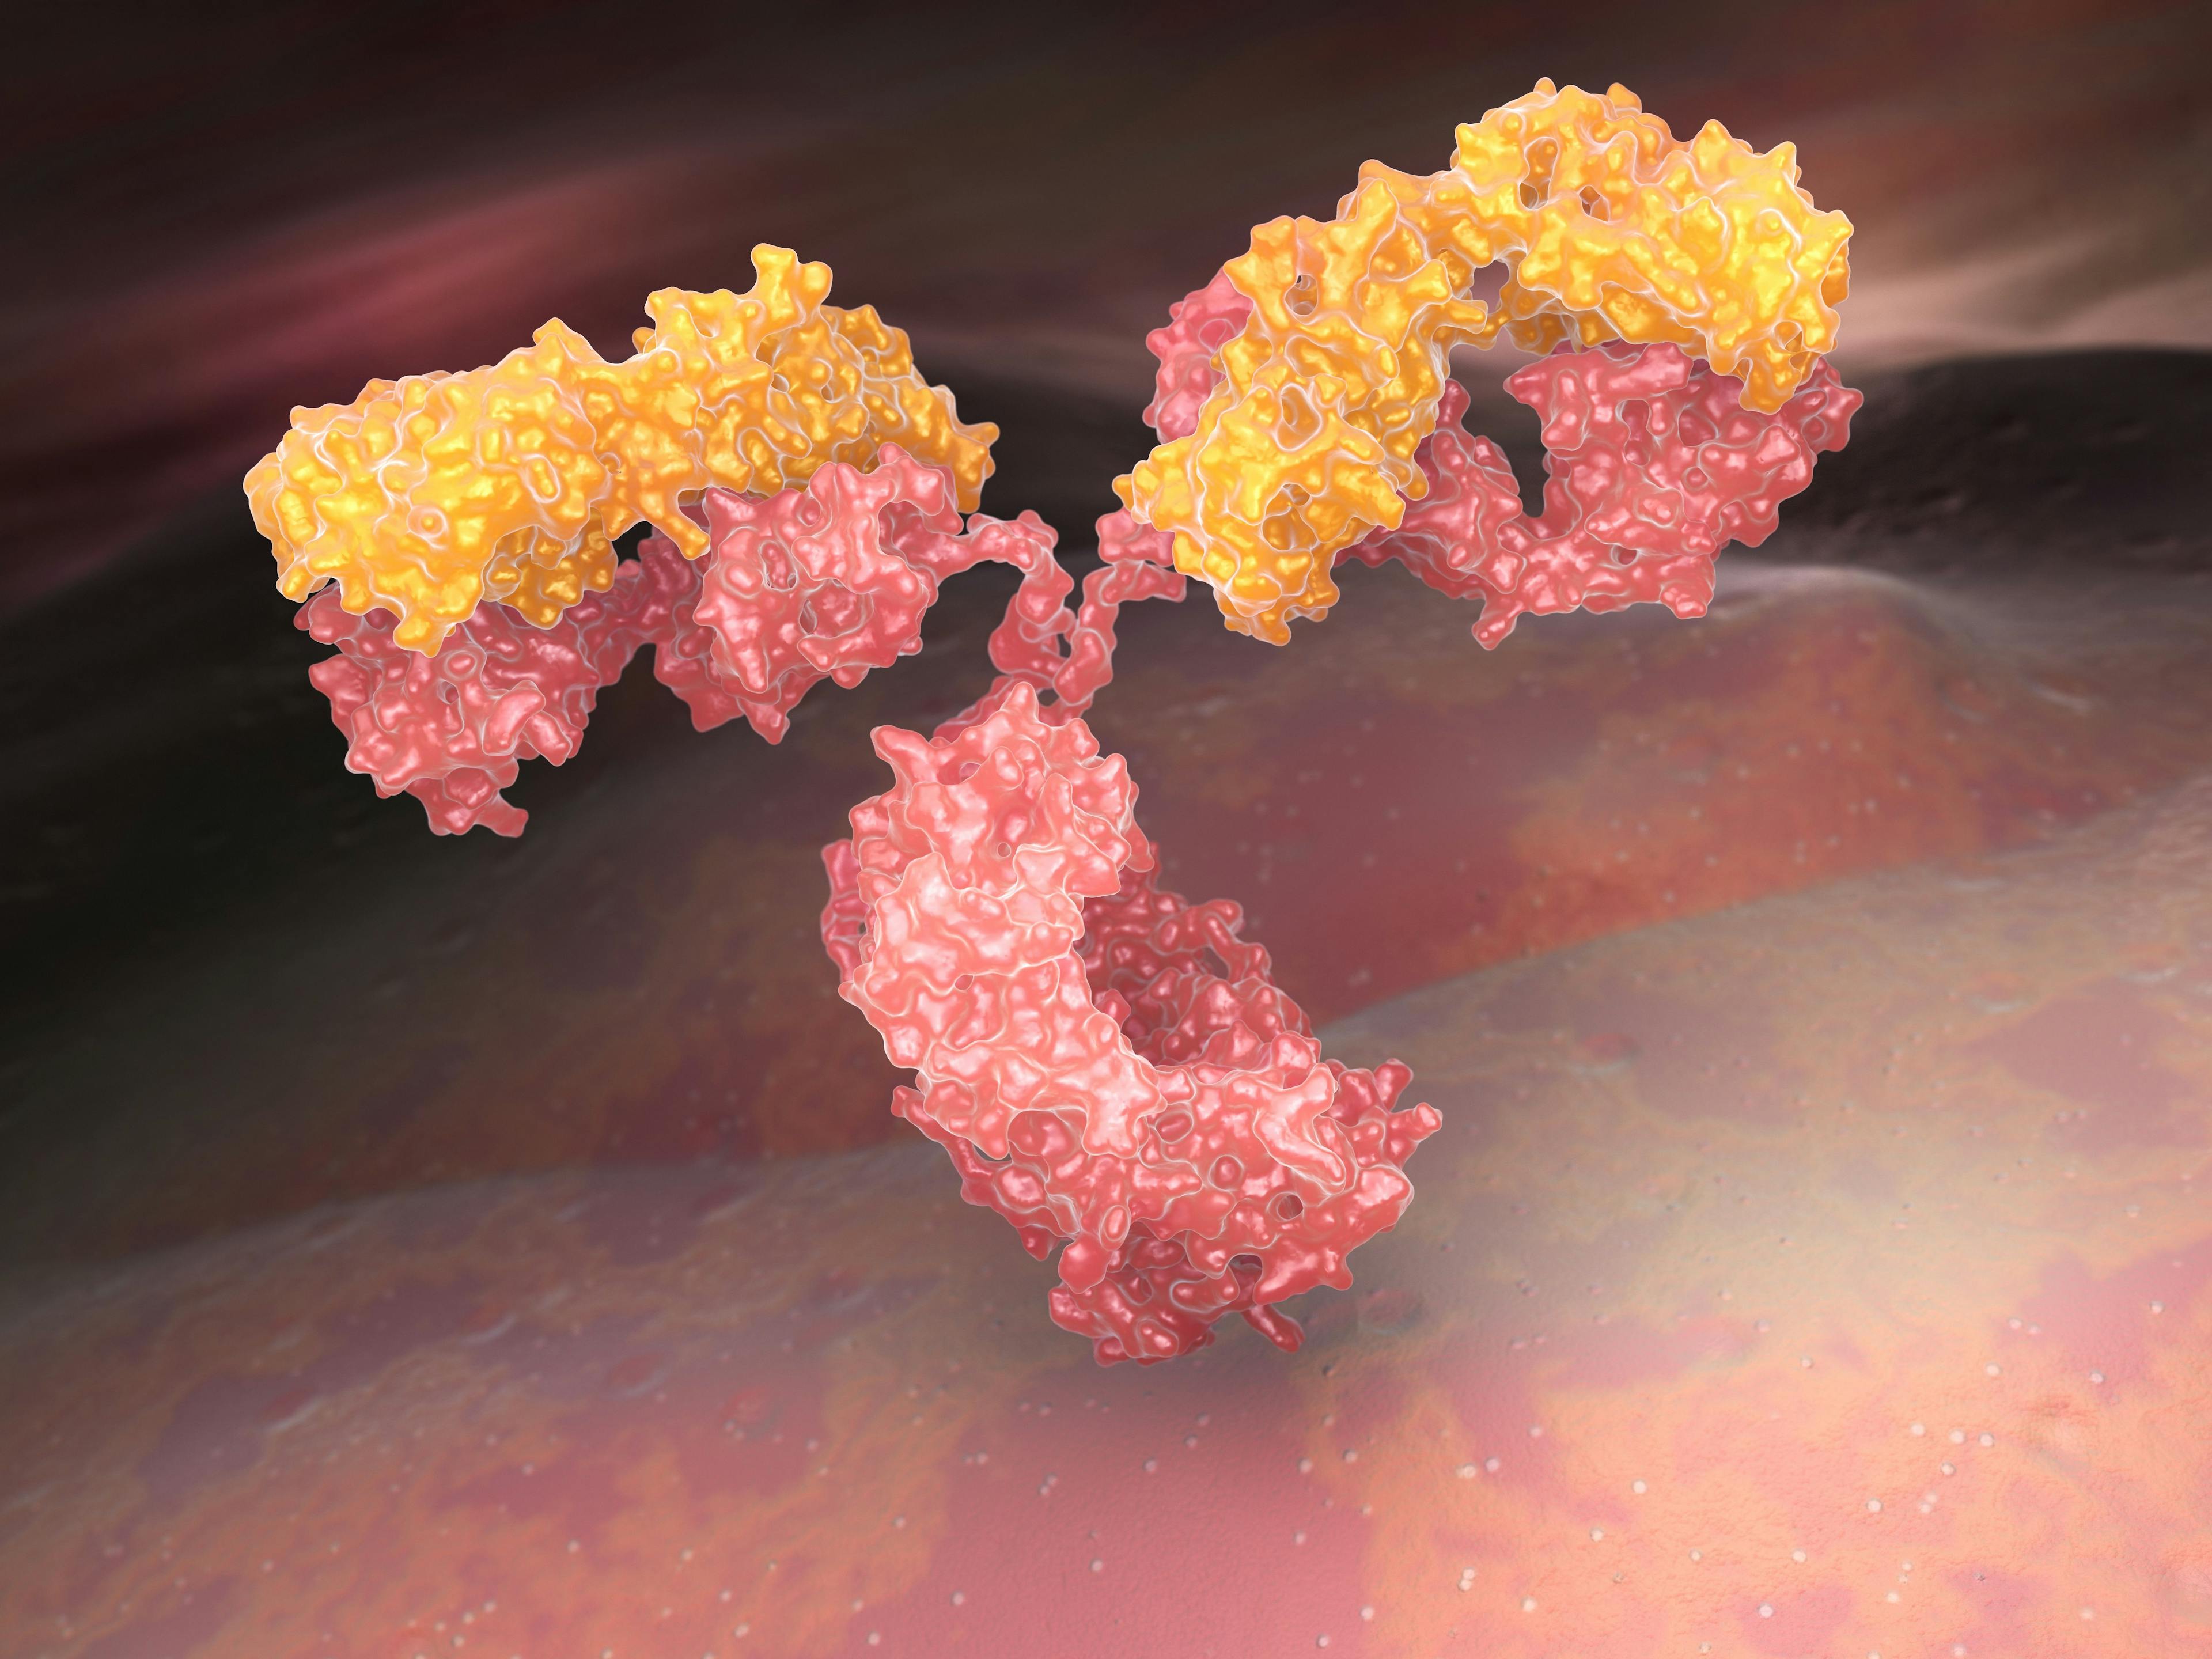 Bispecific Antibodies Wage a Two-Pronged Attack on Tumors